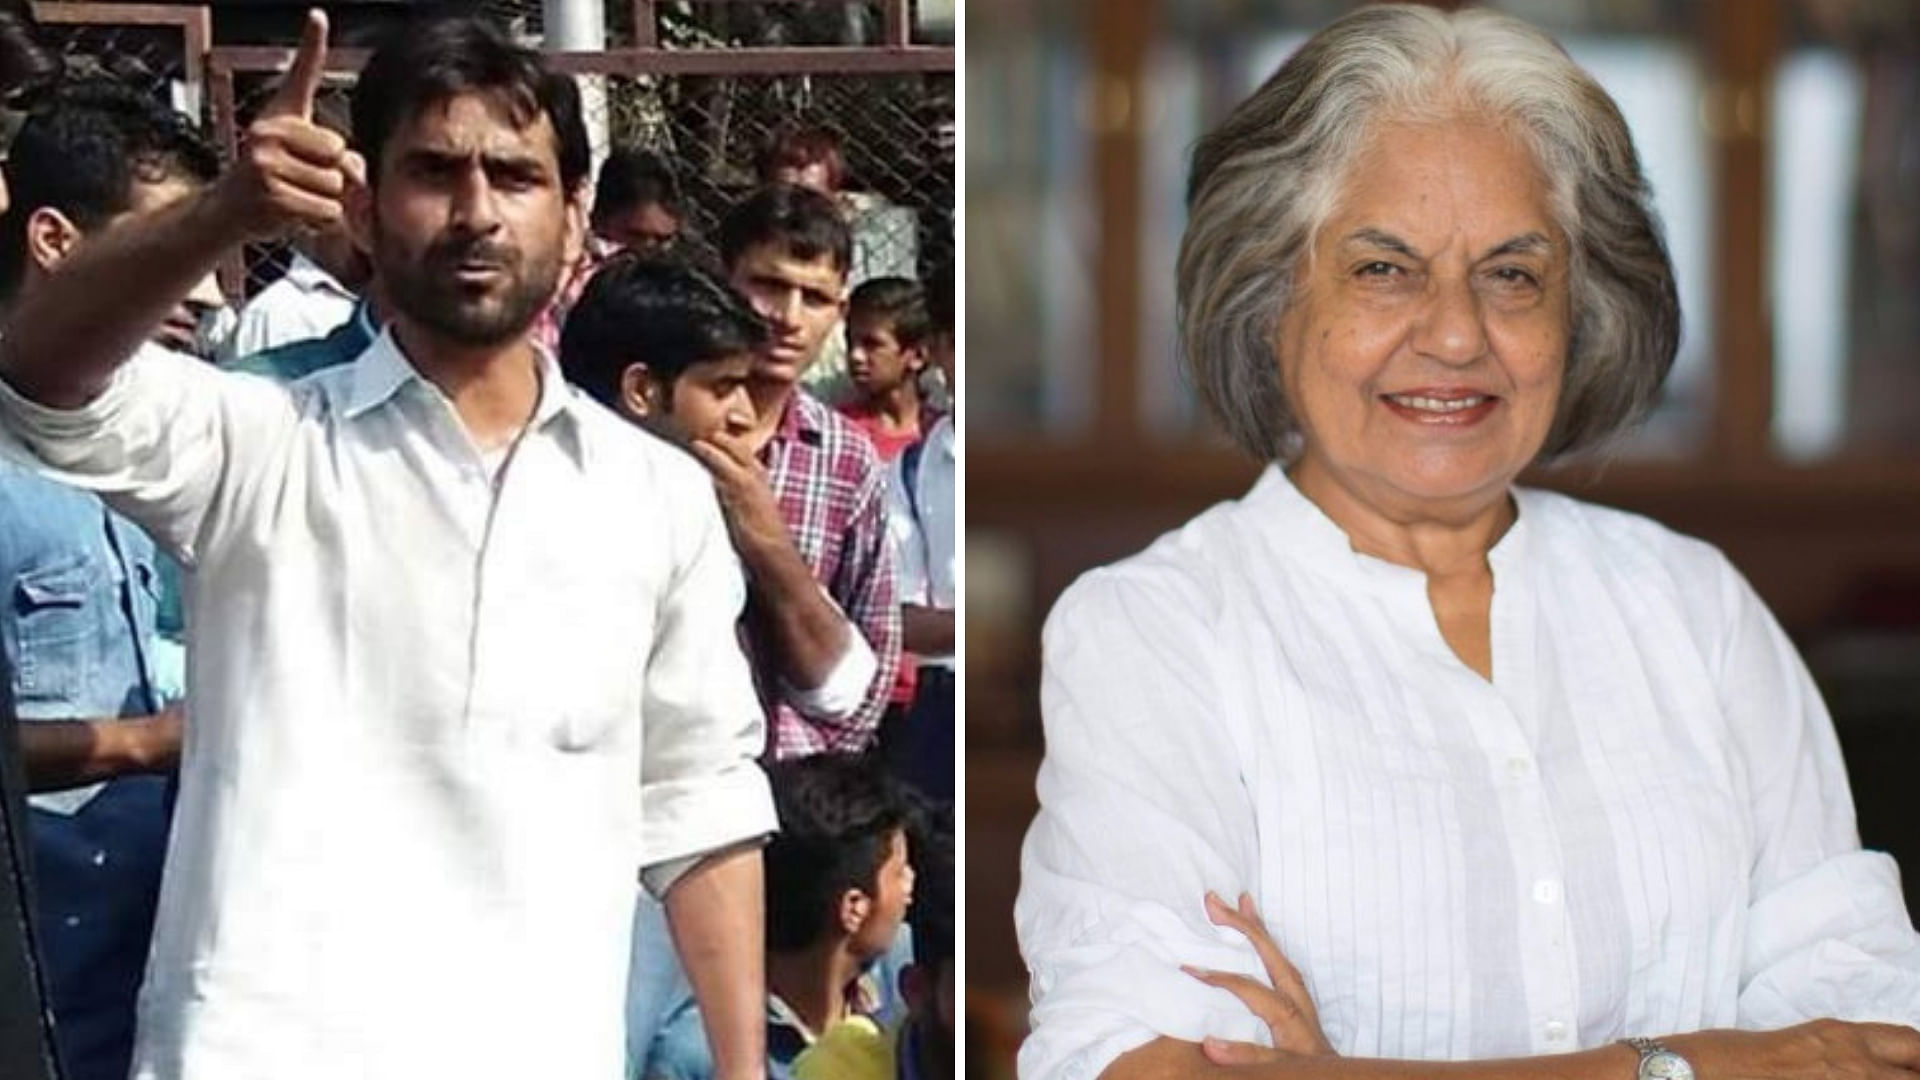 After accusations of rape were levelled against him, lawyer Indira Jaising who represented Kathua anti-rape activist Talib Hussain in his fight for justice against alleged custodial torture, has said that she will no longer represent him.